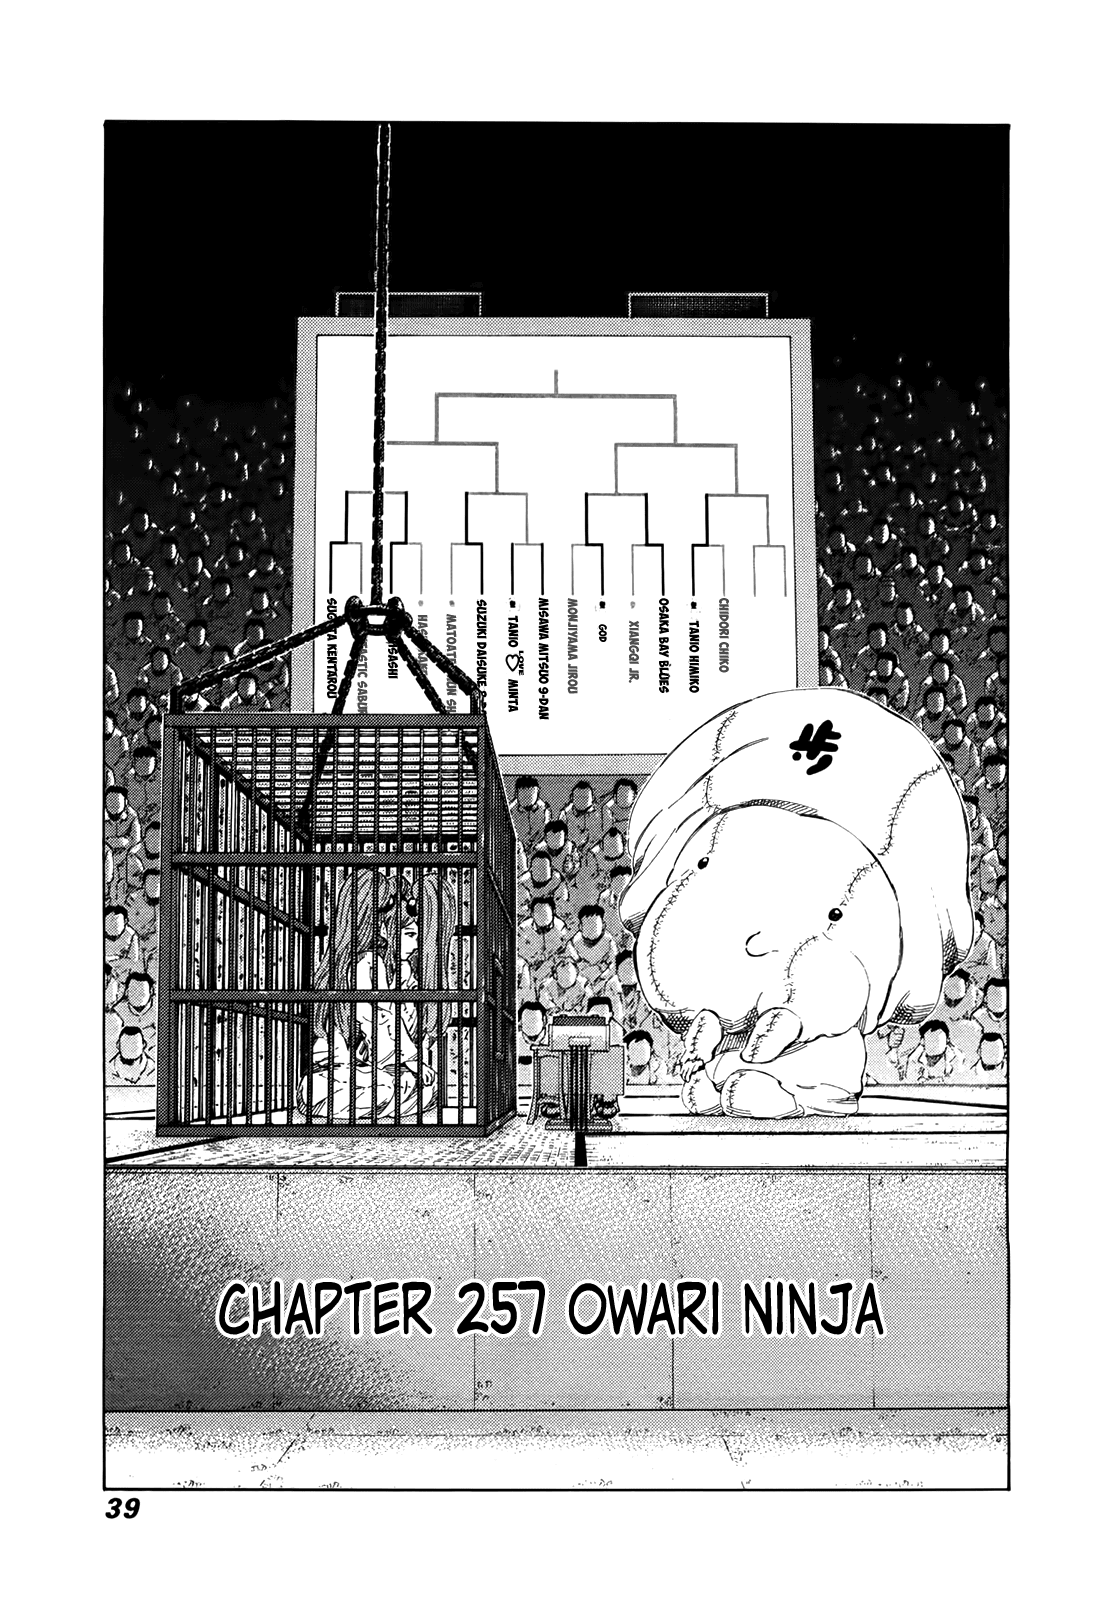 81 Diver Chapter 257 #1